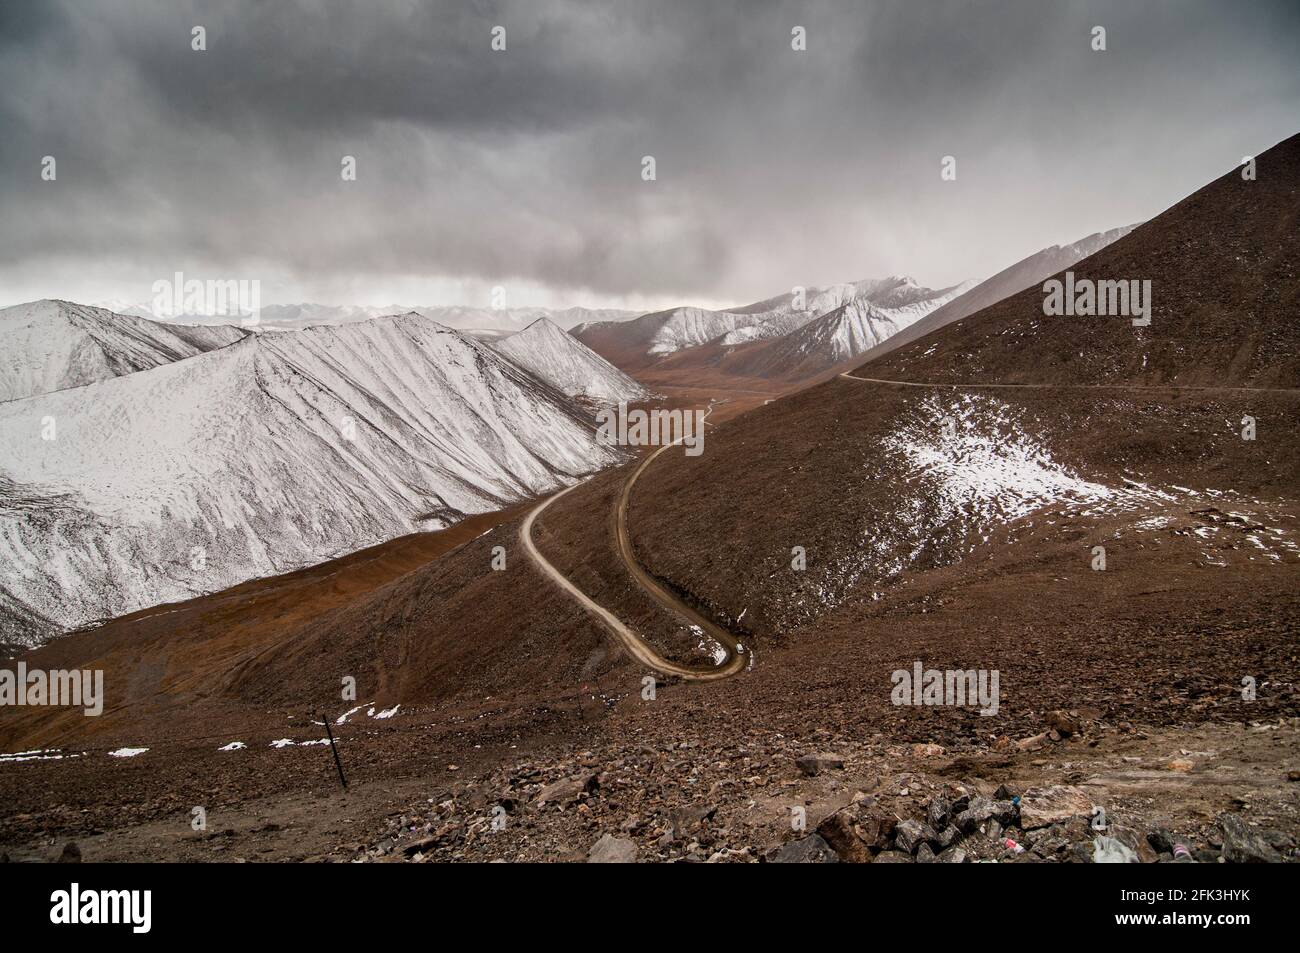 A cold weather front moves across the mountains along the G216 Highway connecting Urumuqi to the Bayingolin Prefecture across the Tianshan mountains in Xinjiang, China, PRC. © Time-Snaps Stock Photo